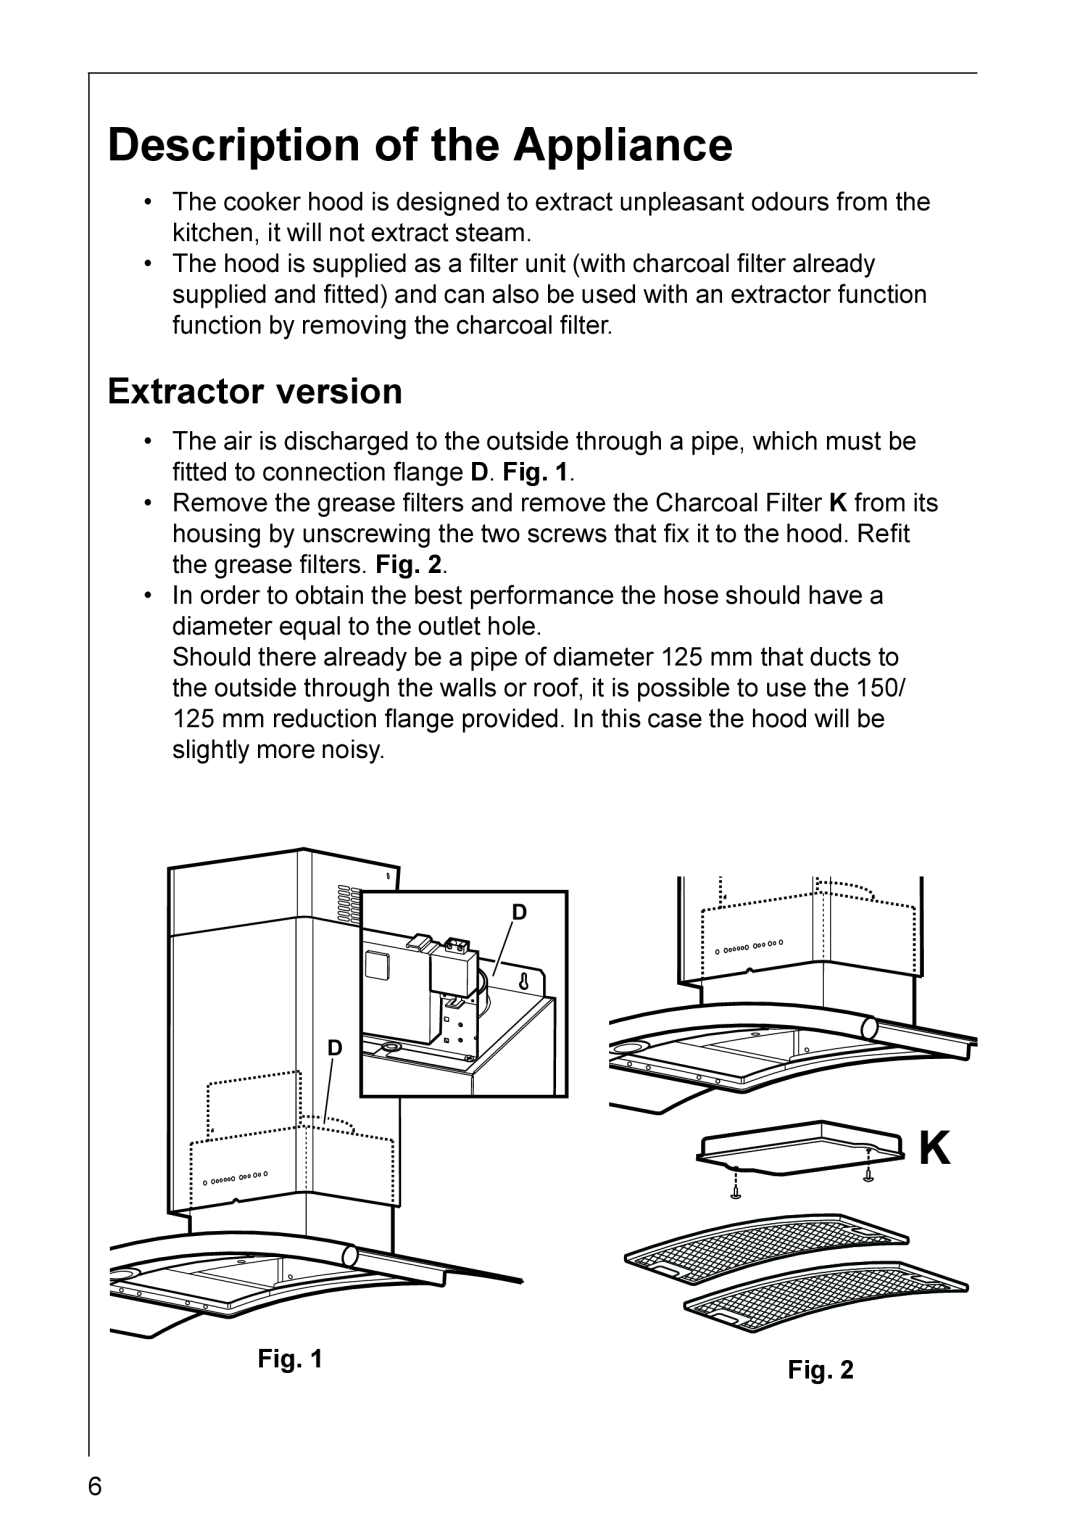 Electrolux HD 8694 installation instructions Description of the Appliance, Extractor version 